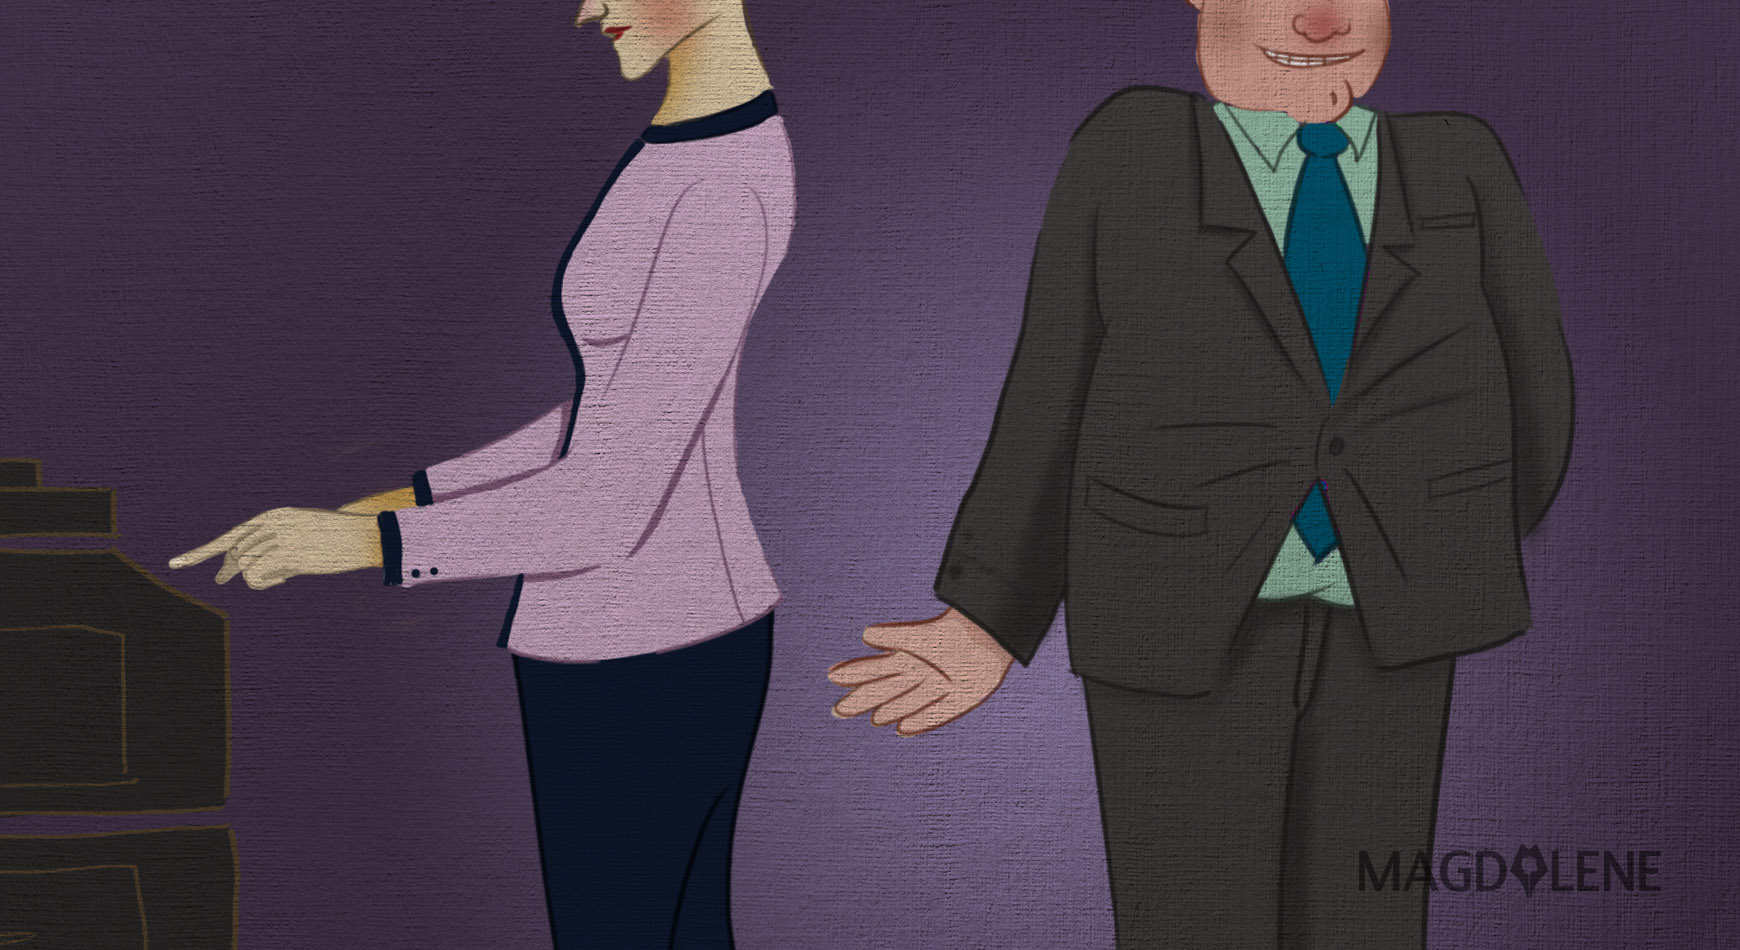 Sexual Harassment at Work Harms Employment and Economy